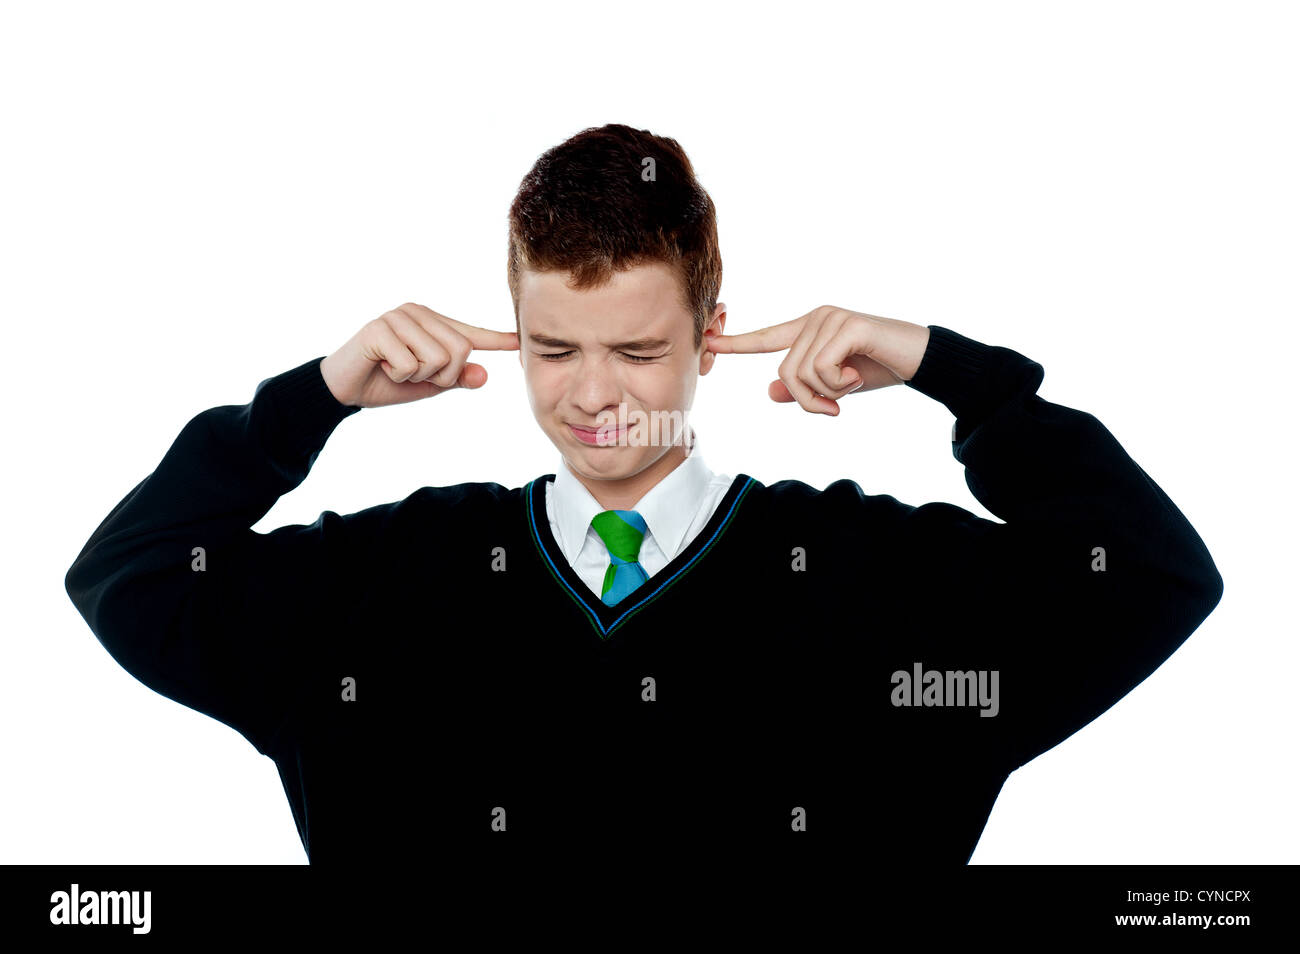 Loud noise becoming unbearable for kid. Boy with fingers on his ears Stock Photo